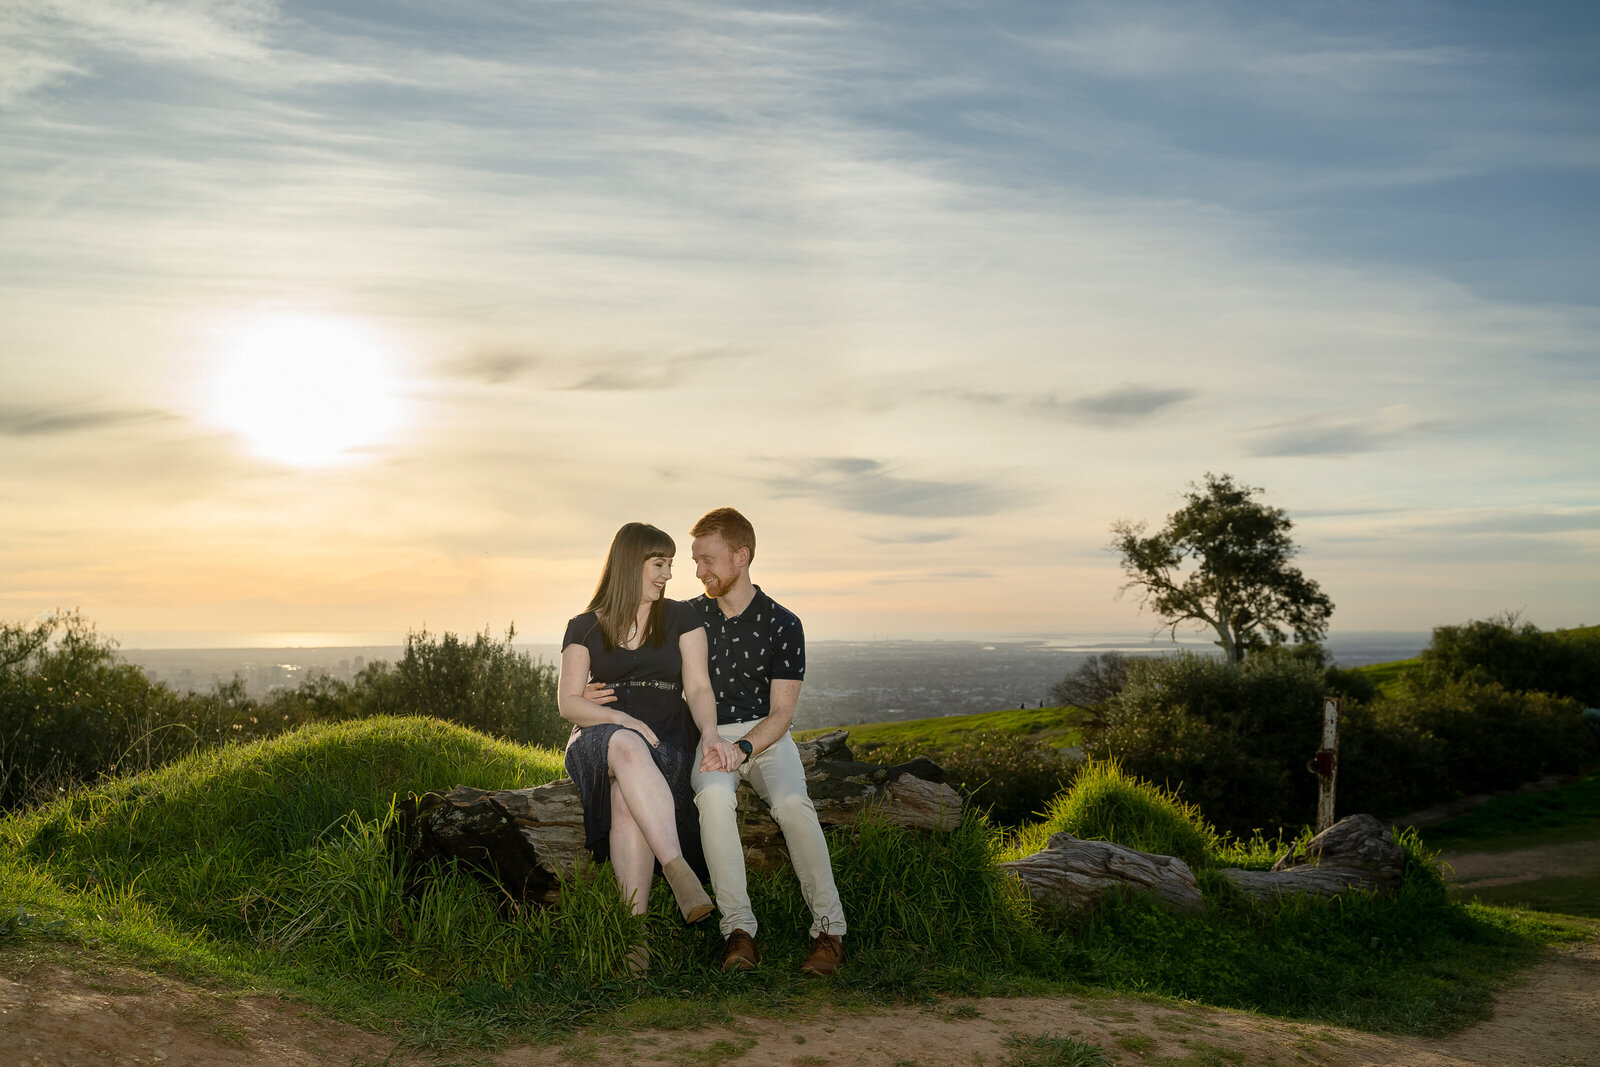 Adelaide_DreamTeamImaging_Engagement _Pre_Wedding_Photography_08